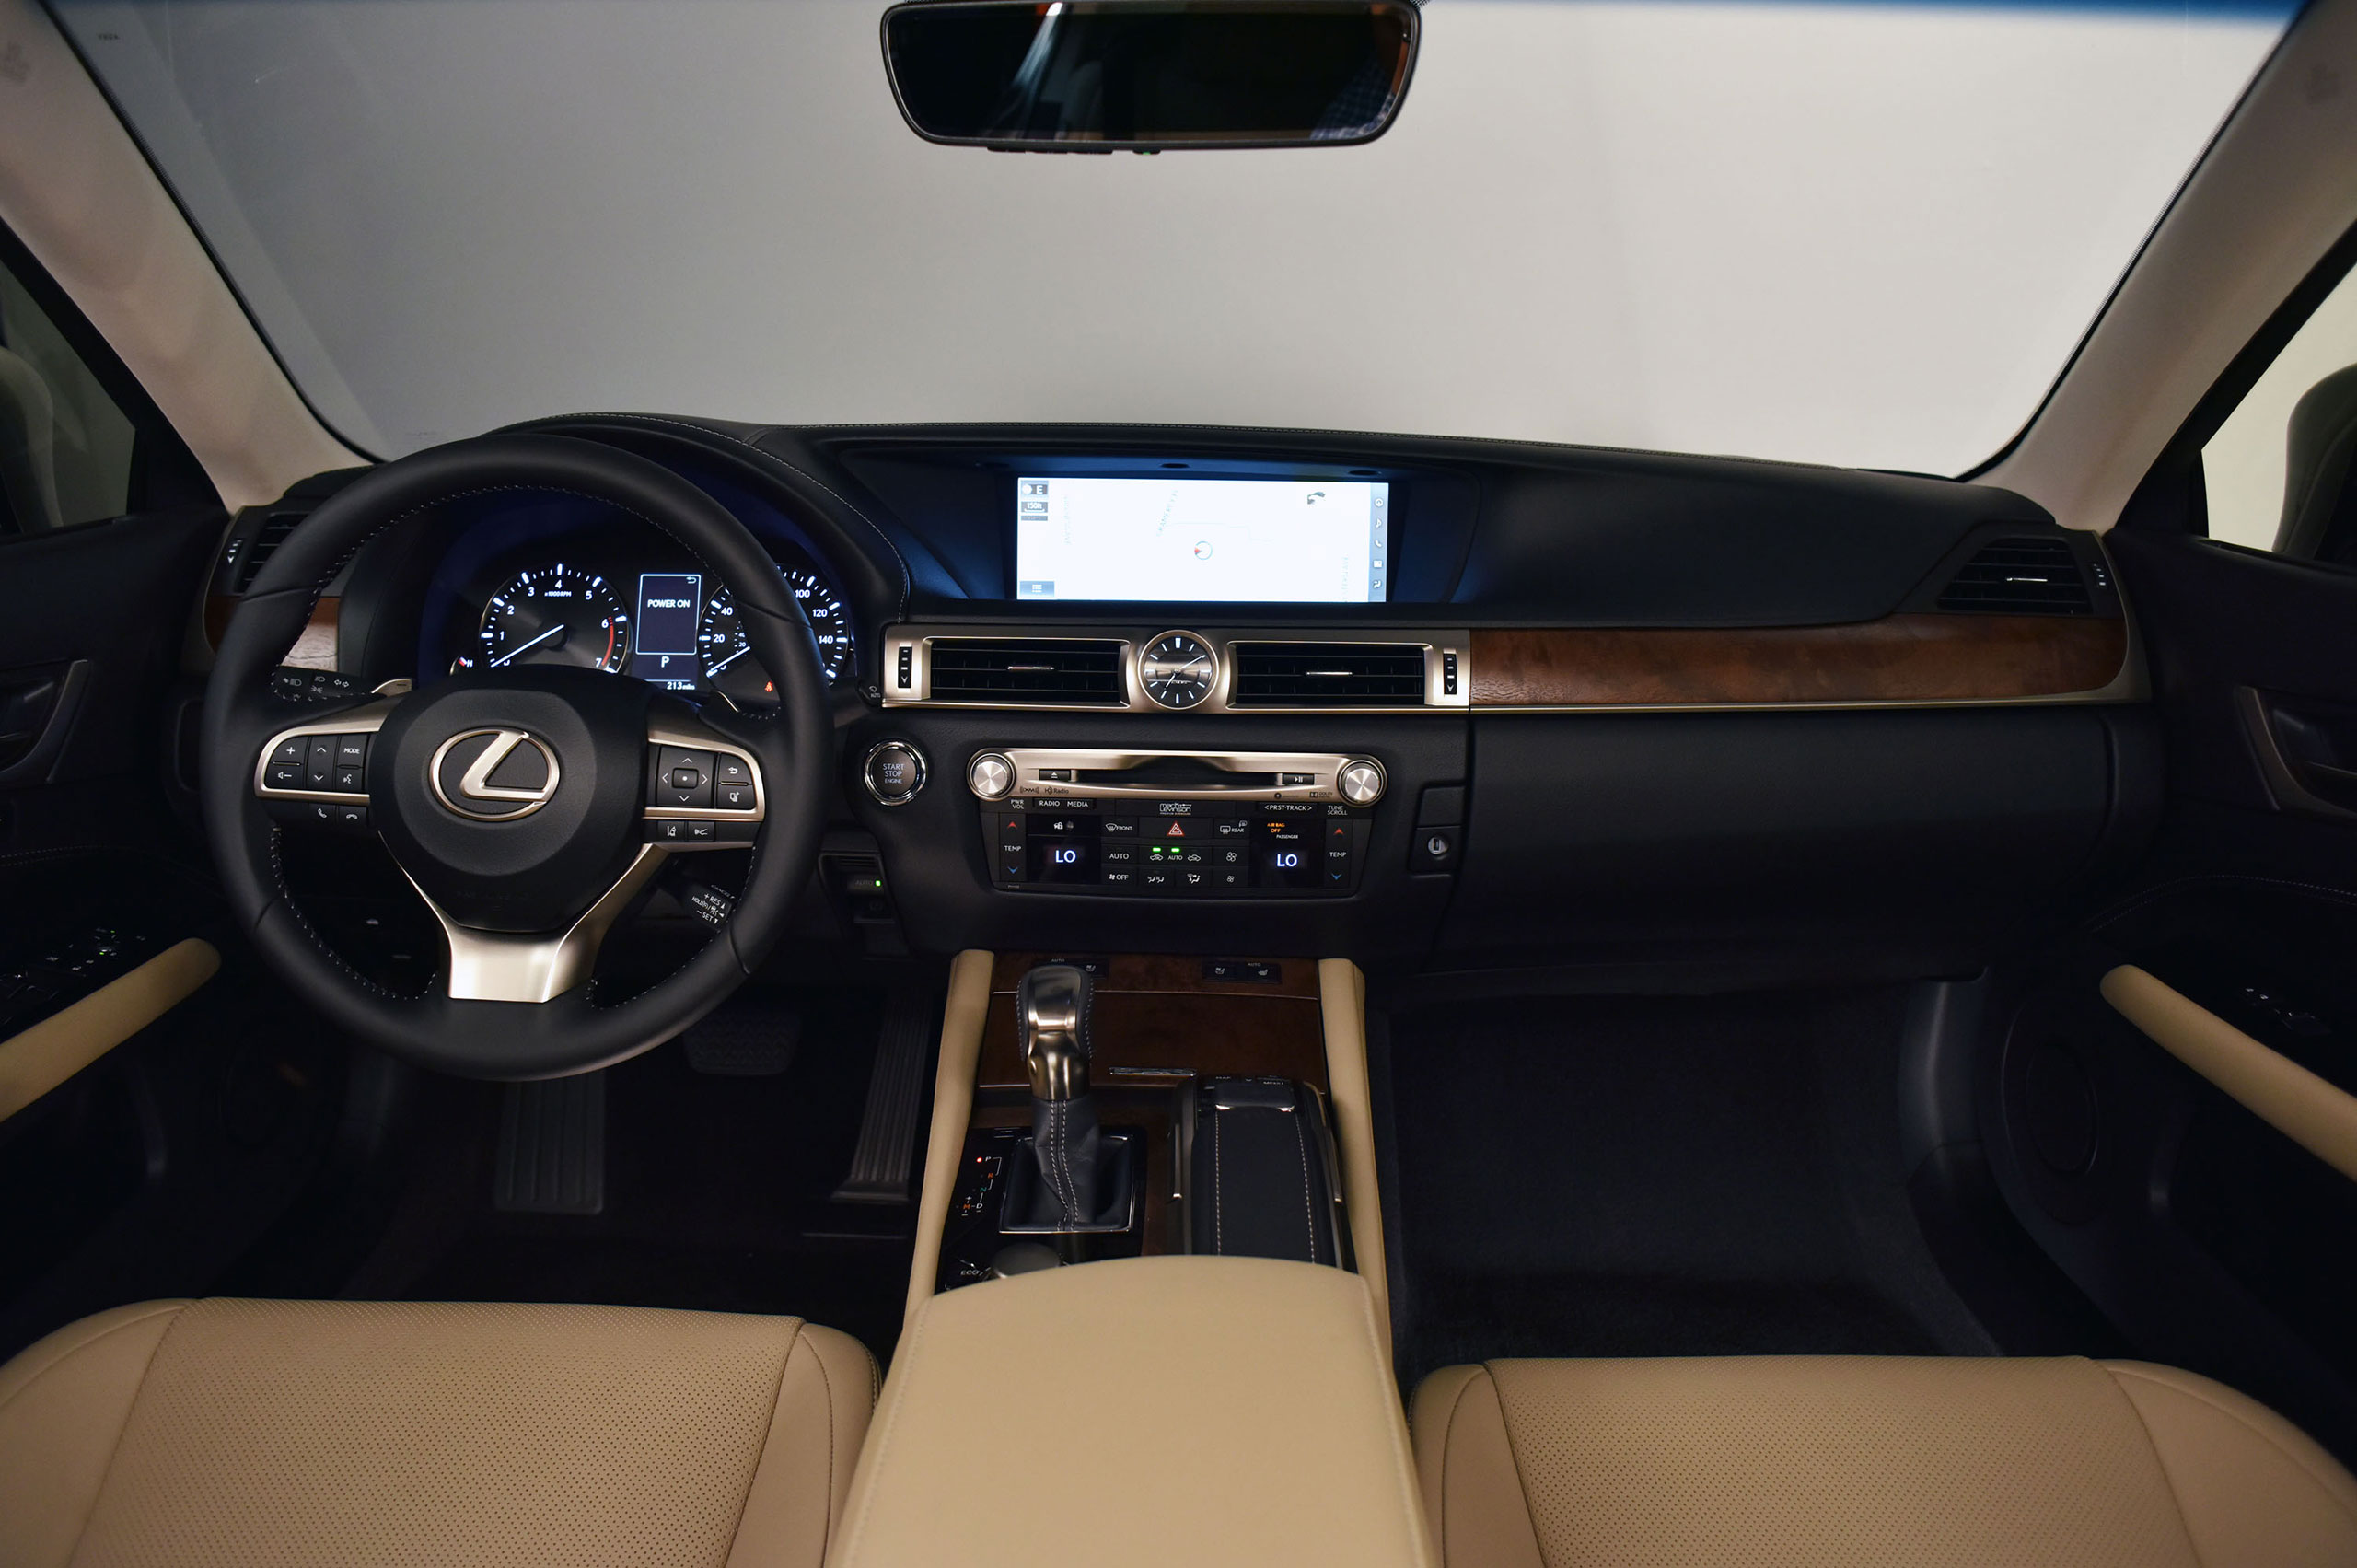 Updated 2016 Lexus Gs Lineup Now Includes Gs 200t With 2 0l